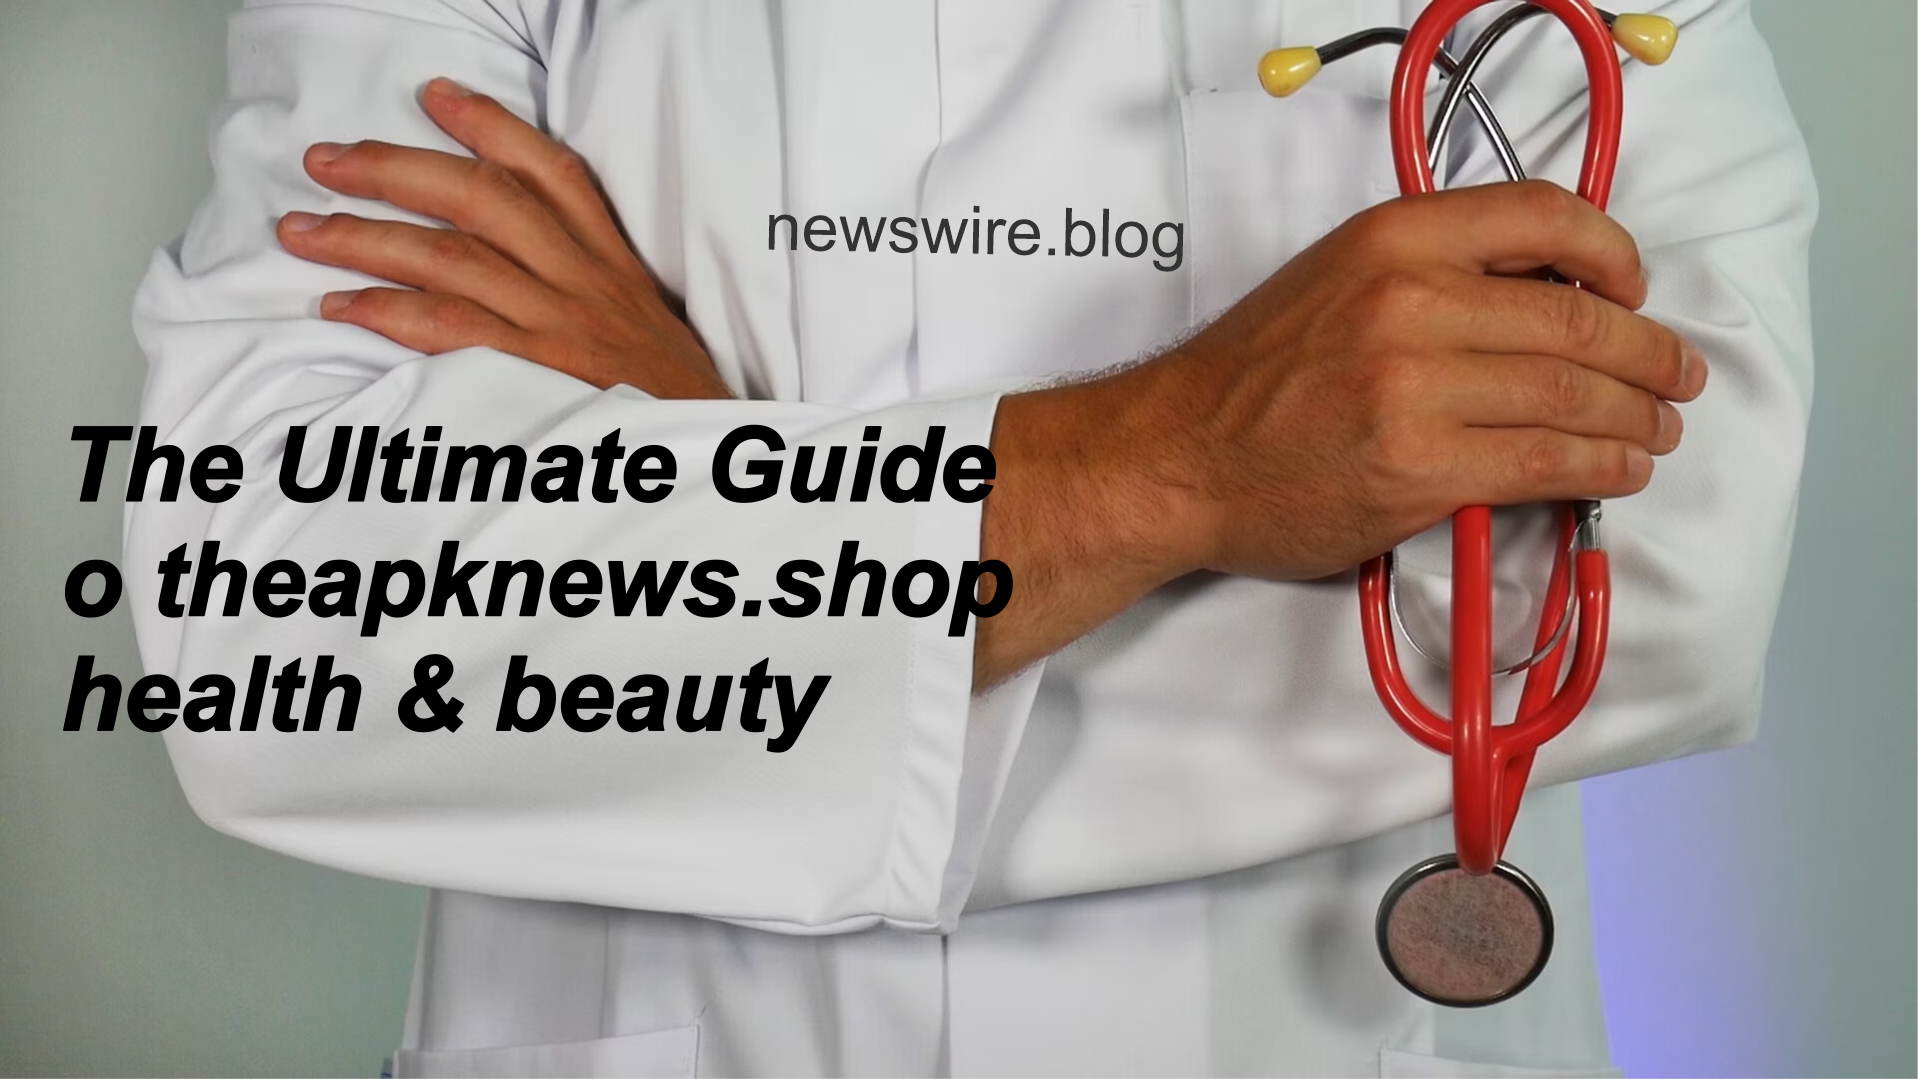 The Ultimate Guide to theapknews.shop health & beauty